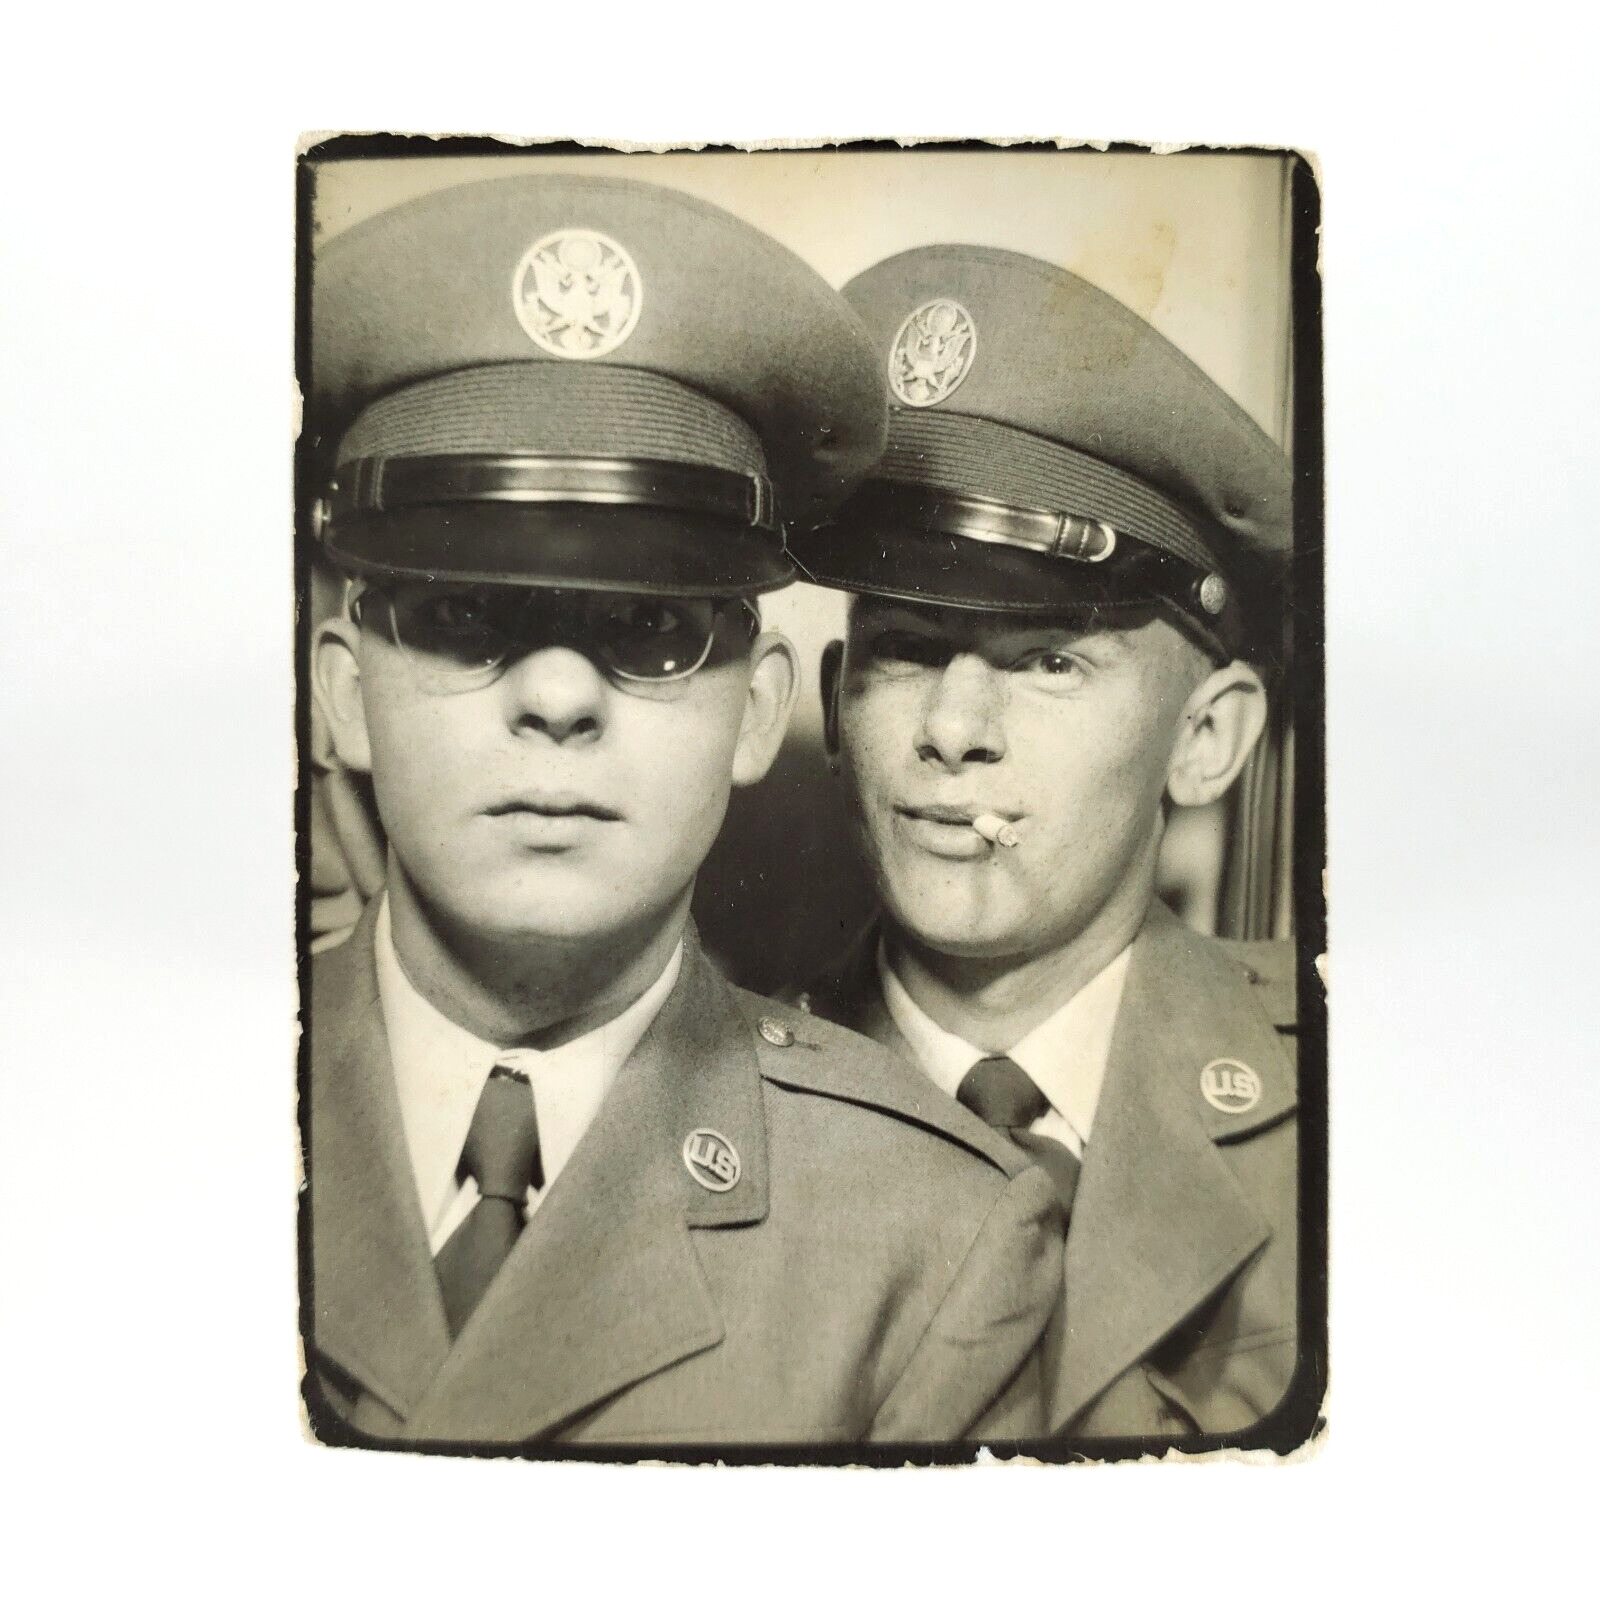 Affectionate Air Force Men Photobooth Snapshot 1940s WW2 Smoking Soldier A4284